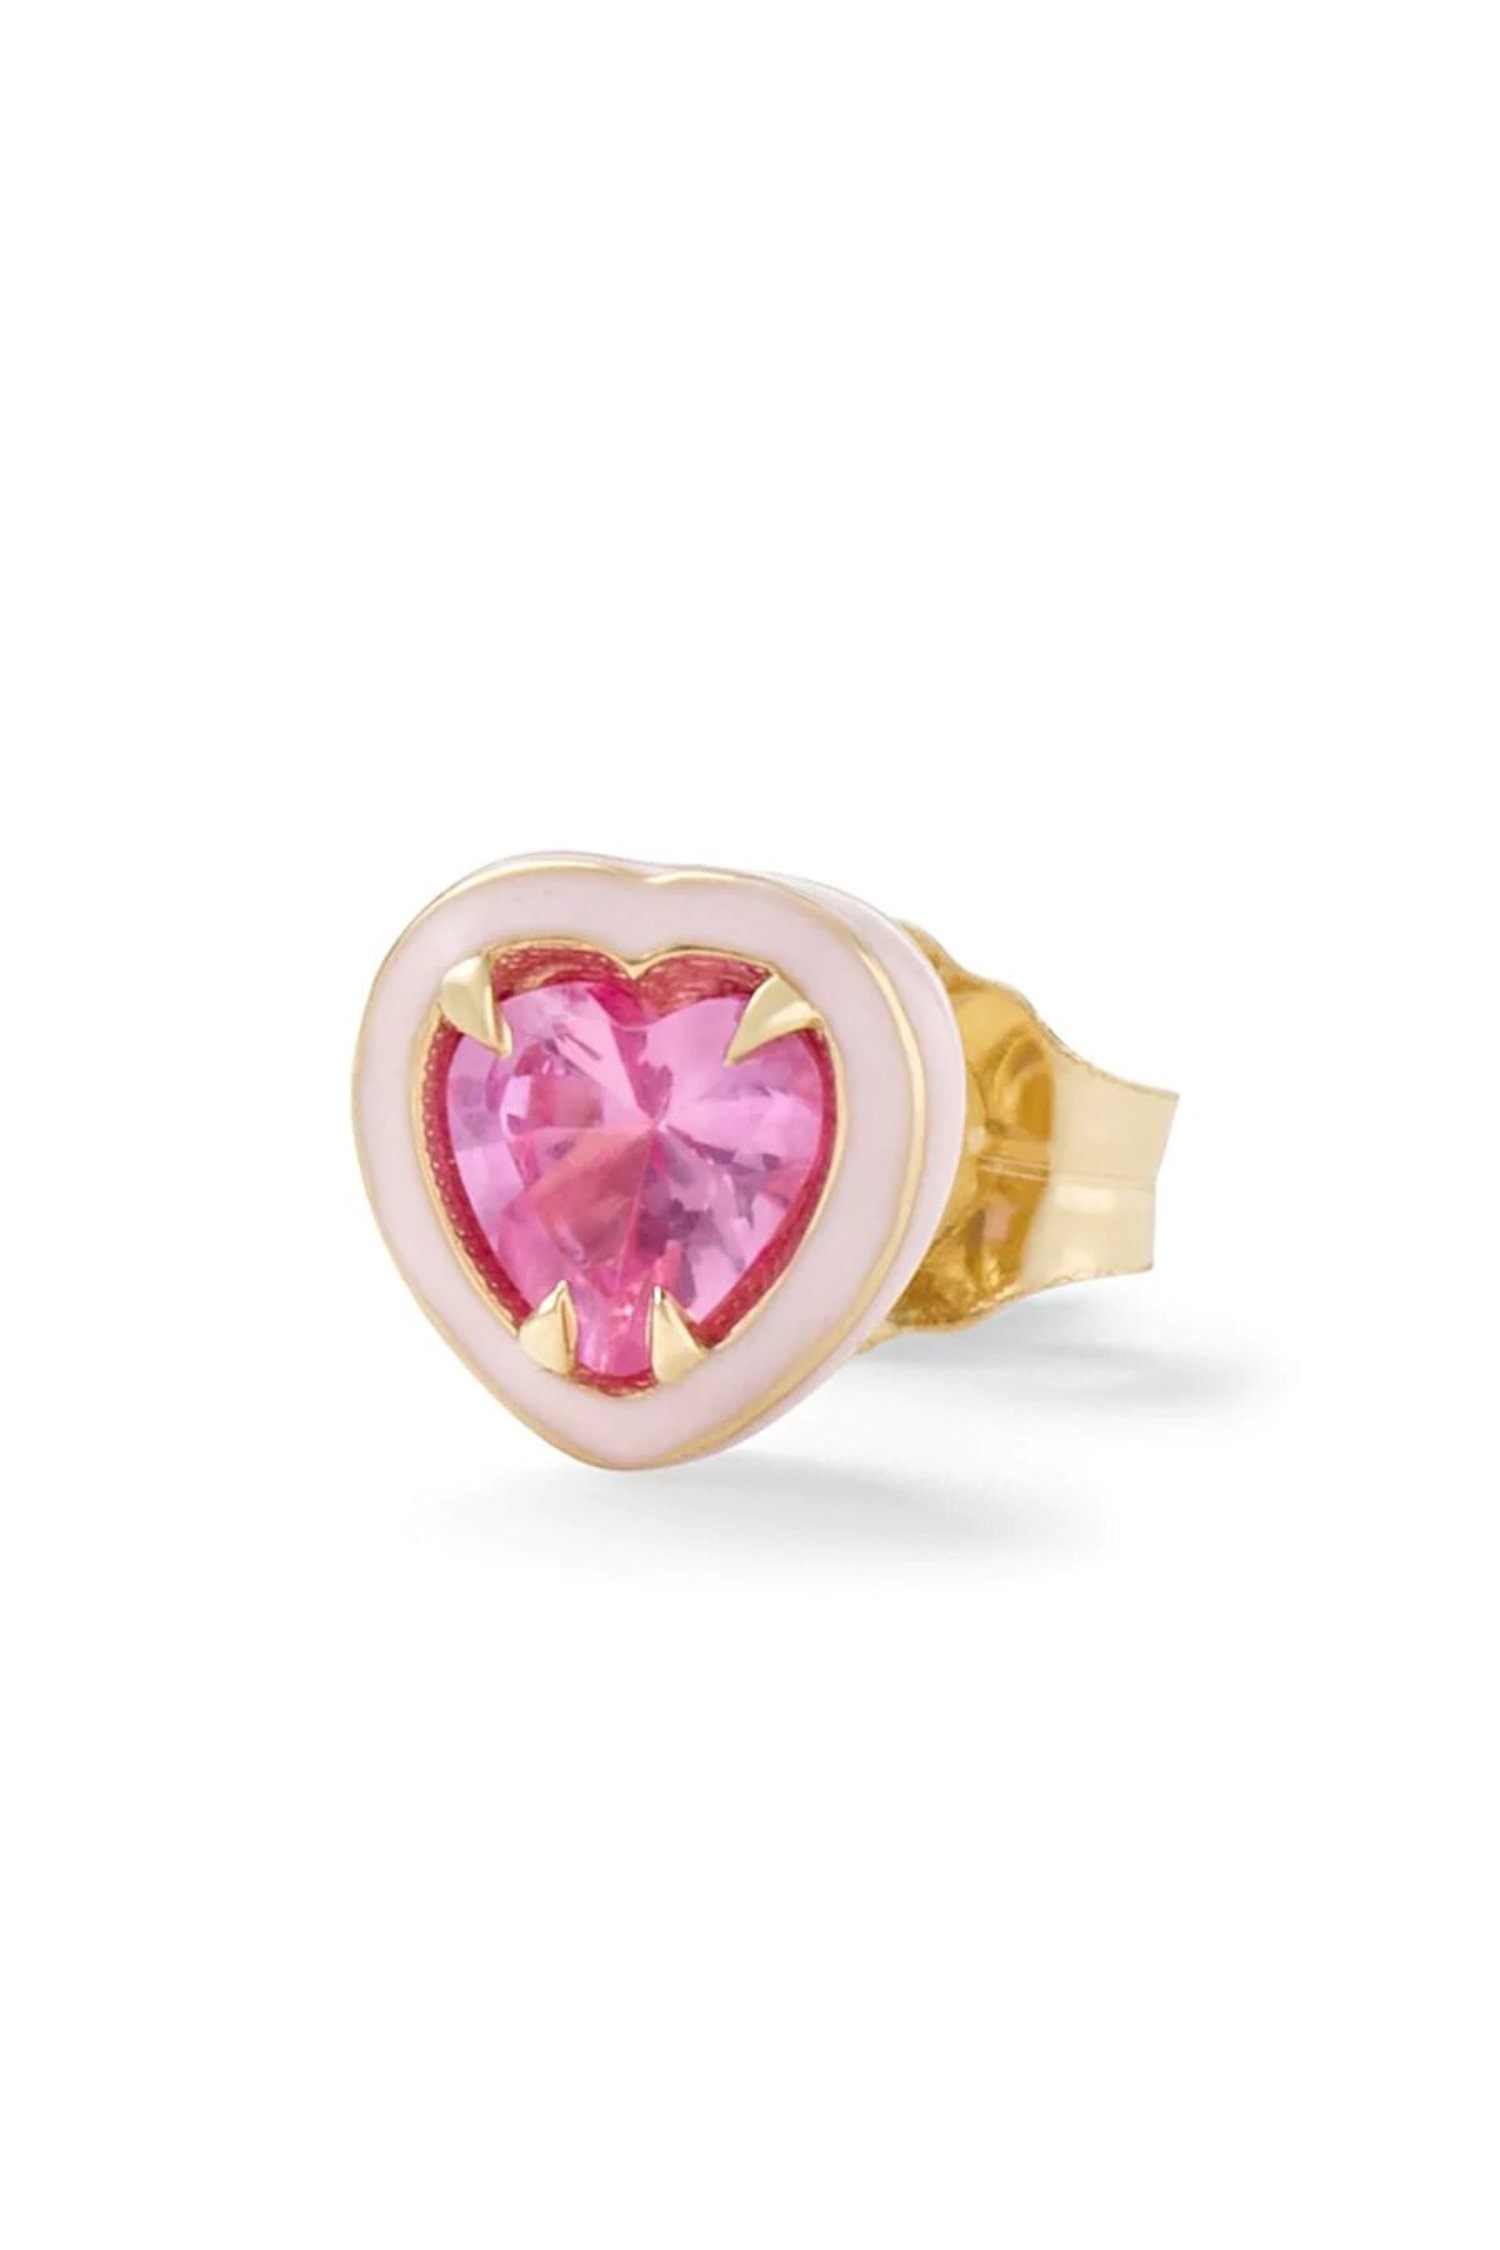 (Single) Mini Pink Sapphire Heart Cocktail Stud in 14K Yellow Gold